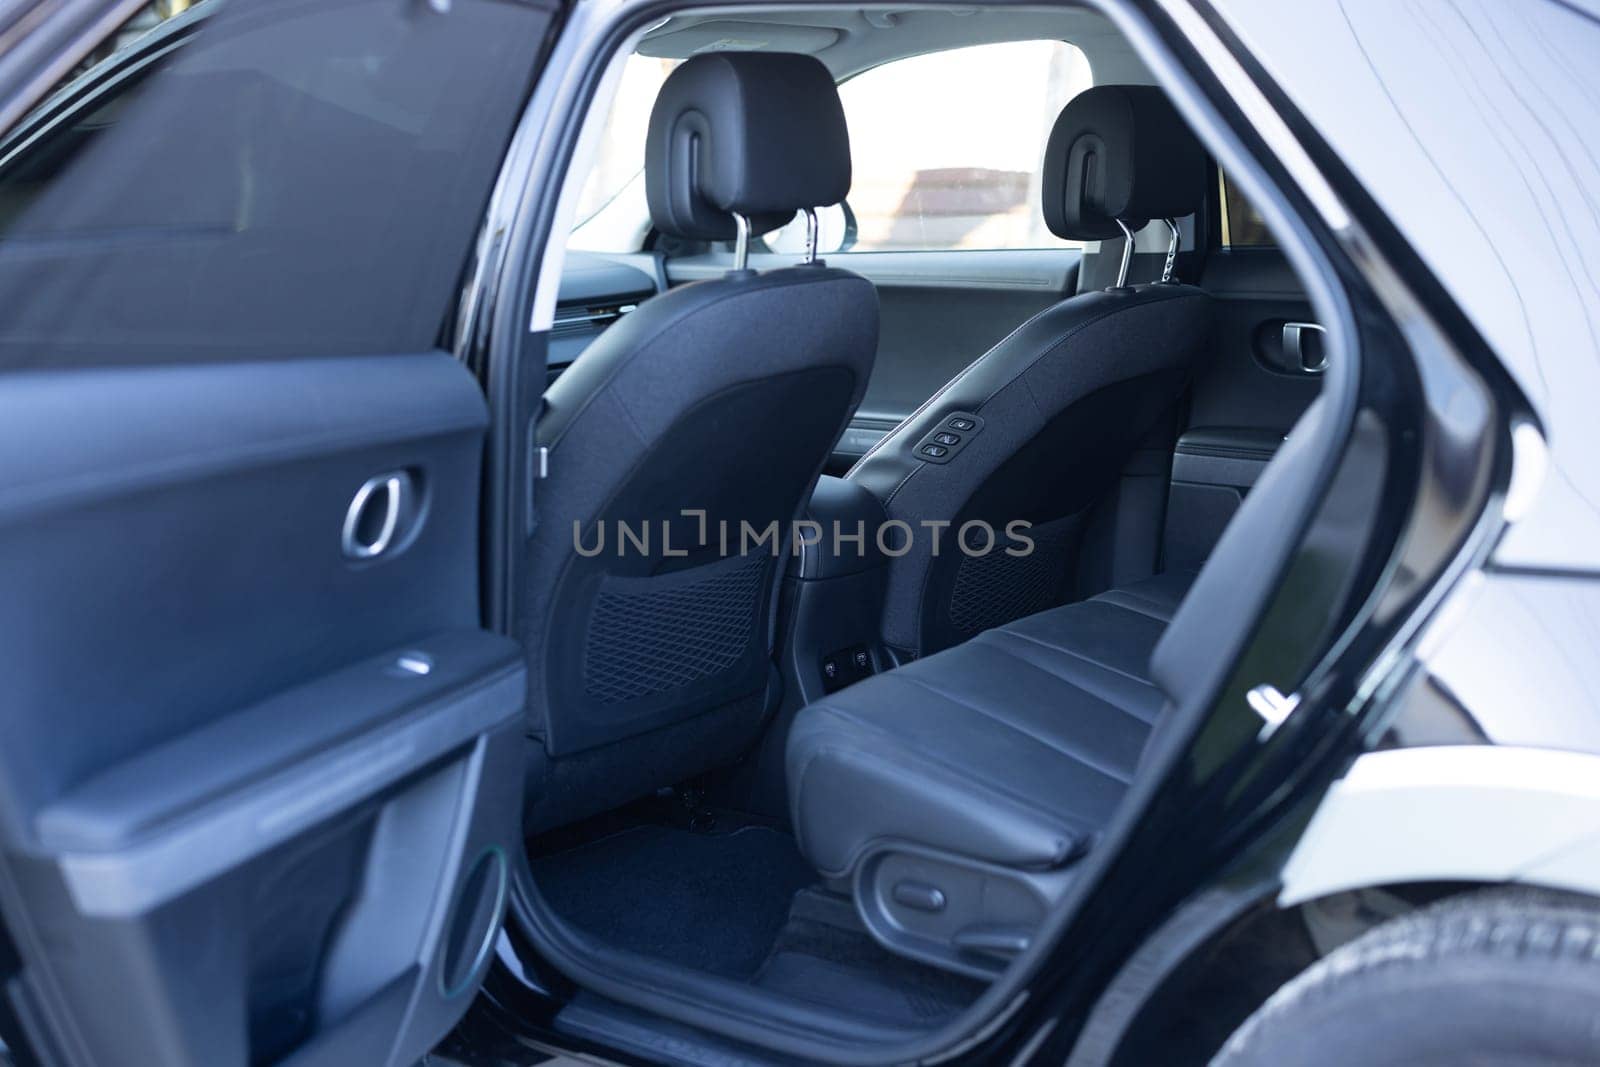 Rear leather passenger seats in modern lux electric car. Black leather car passenger seat. Control unit with electric seat adjustment for rear passengers in luxury car. Modern car interior detail by uflypro